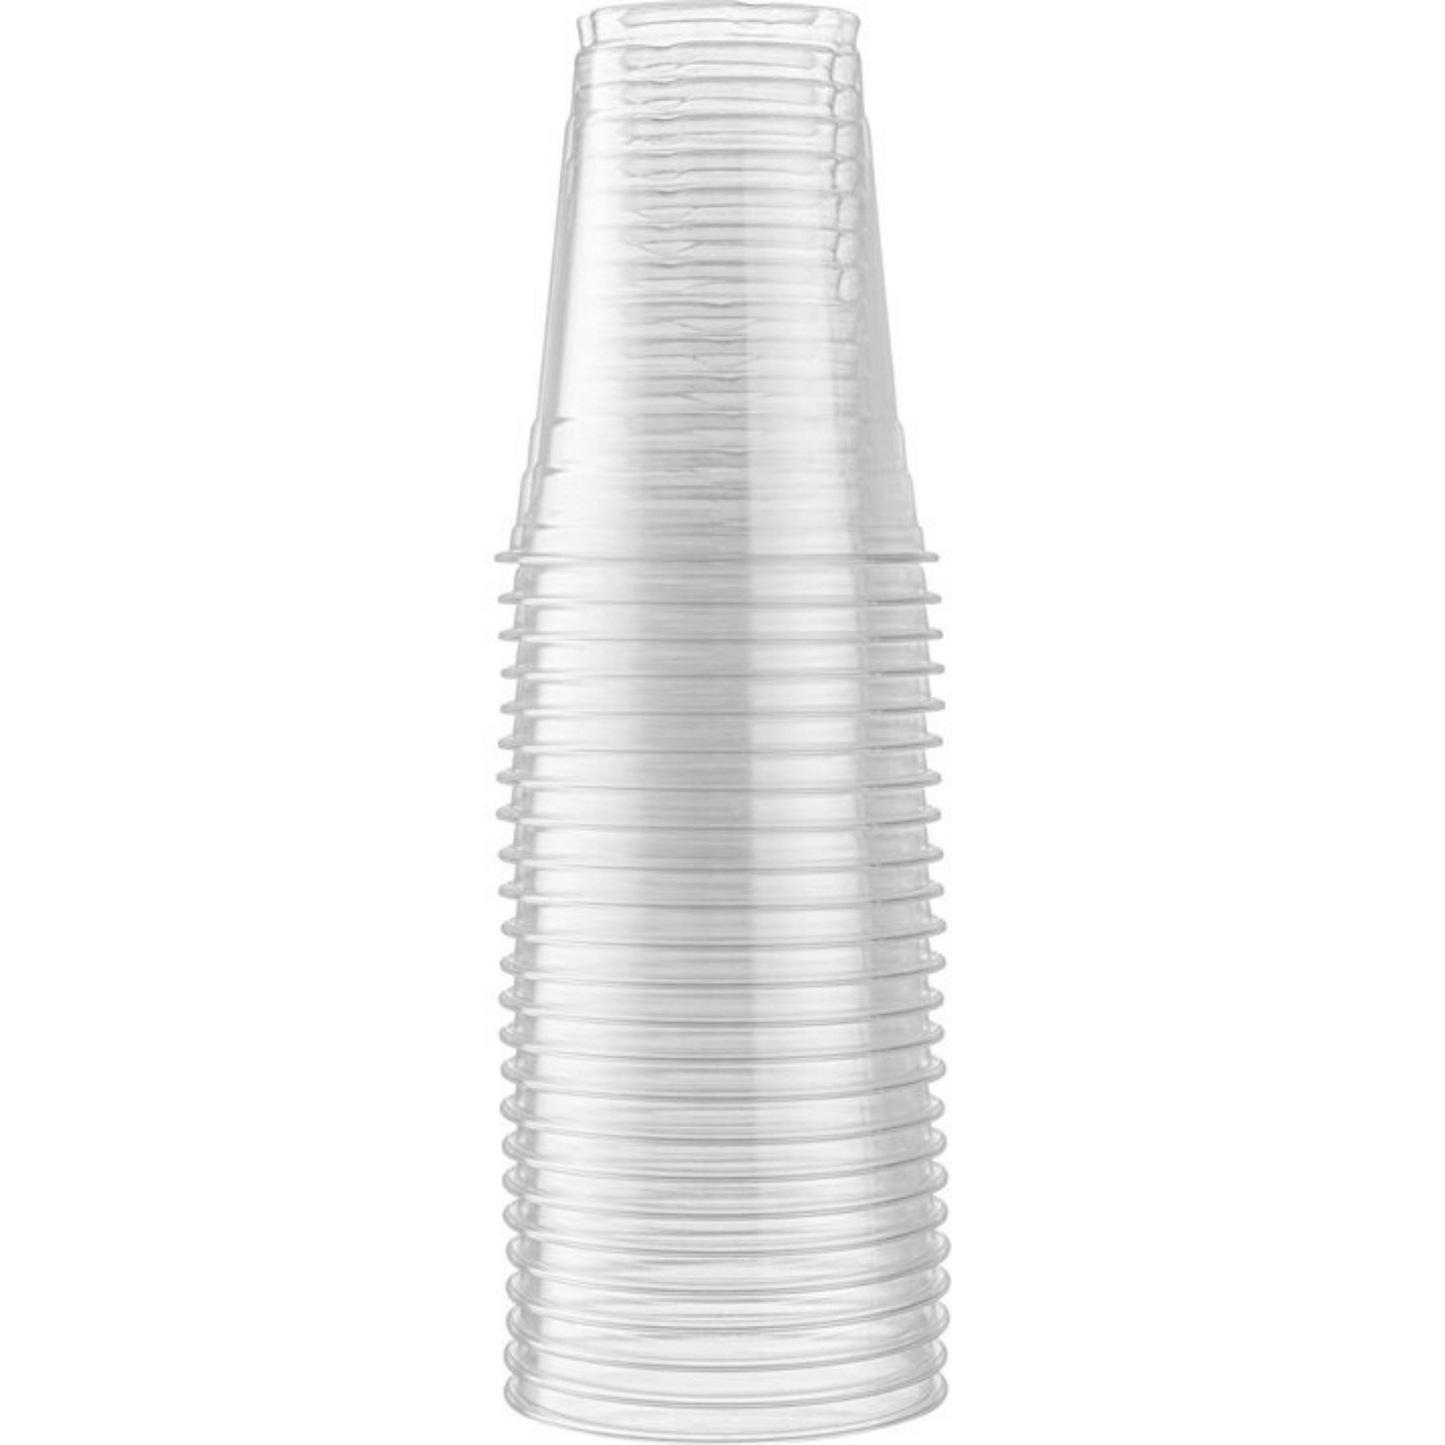 16oz Plastic Clear PET Cups With Flat Lid & Straw, for All Kinds of Beverages Smoothie Cups VeZee Cups 100 Pack 